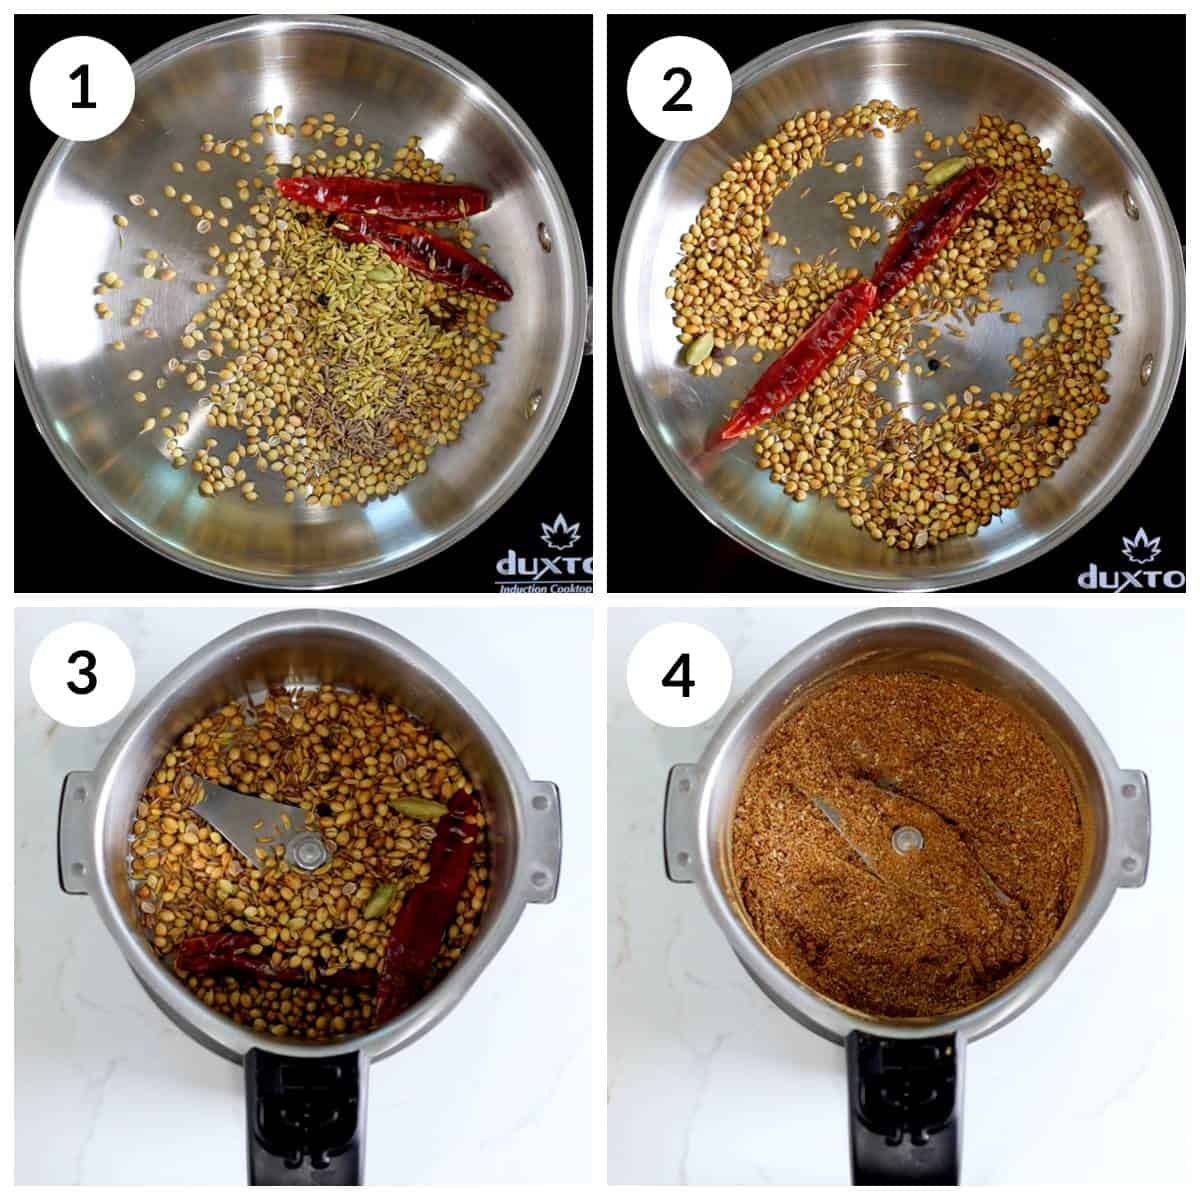 Steps showing roasting whole spices and grinding them for kadai paneer masala powder